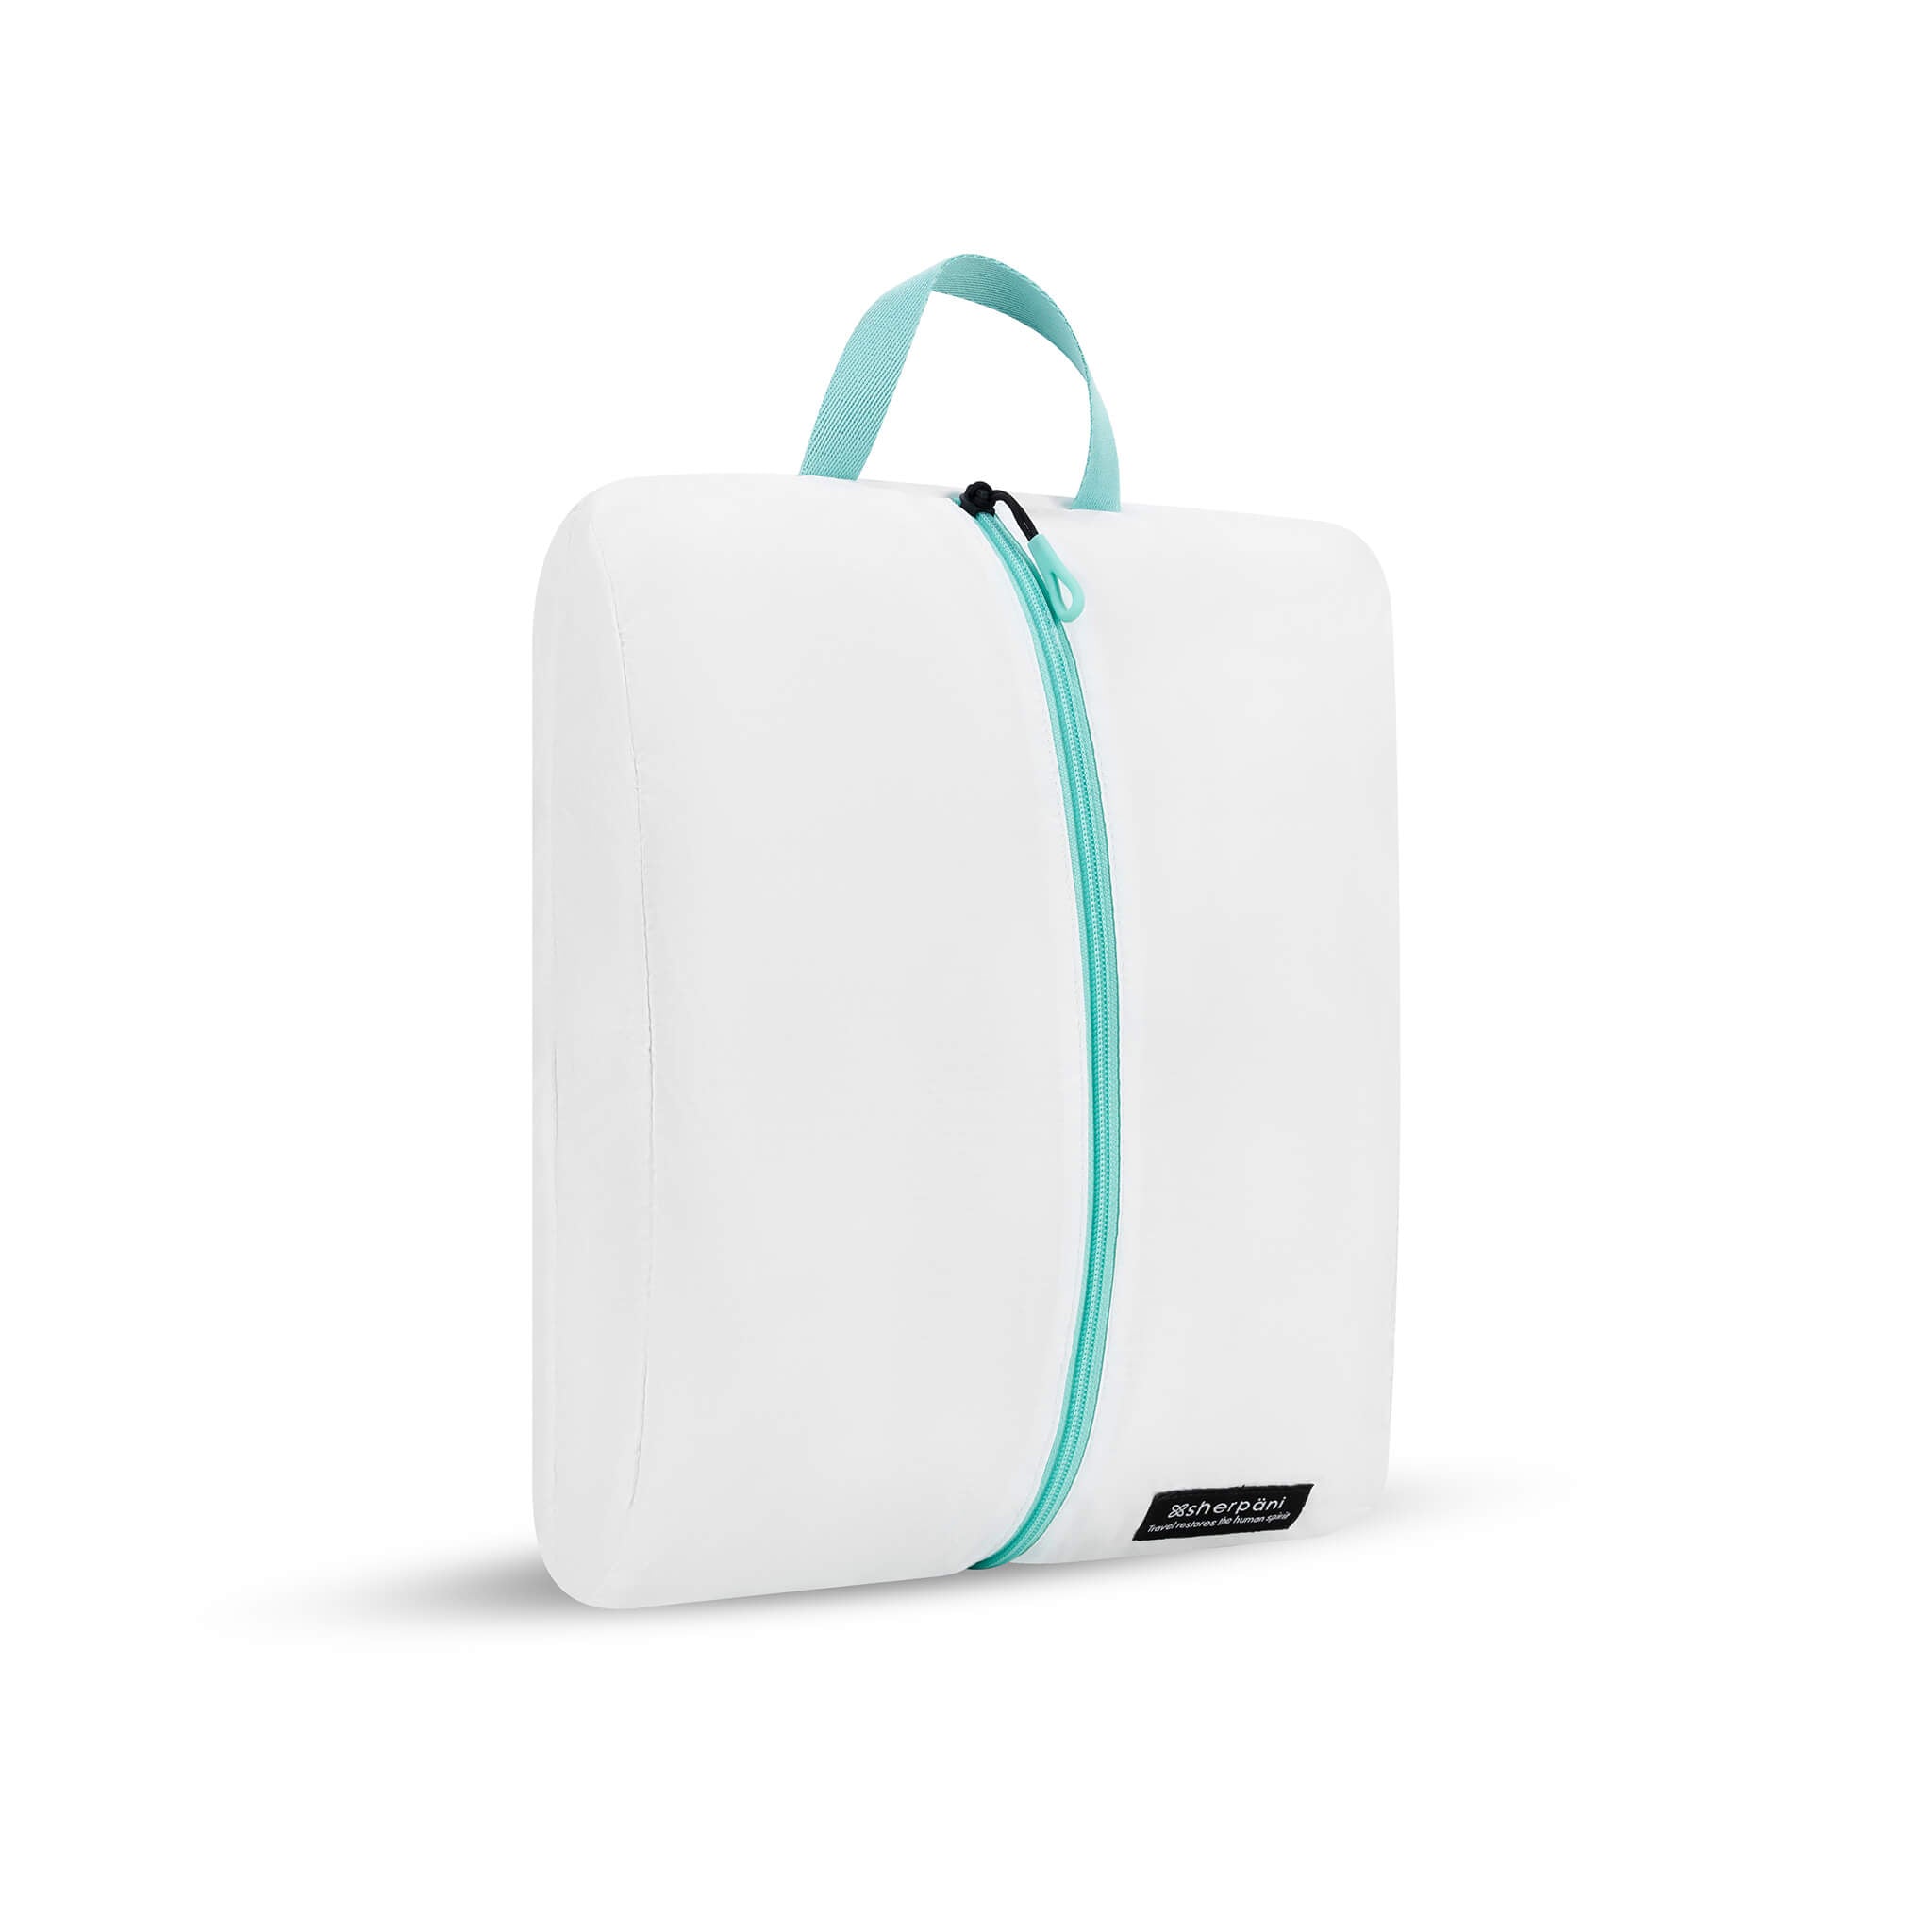 Angled front view of Compass Shoe Bag. The bag is white with zipper and handle accented in aqua. 